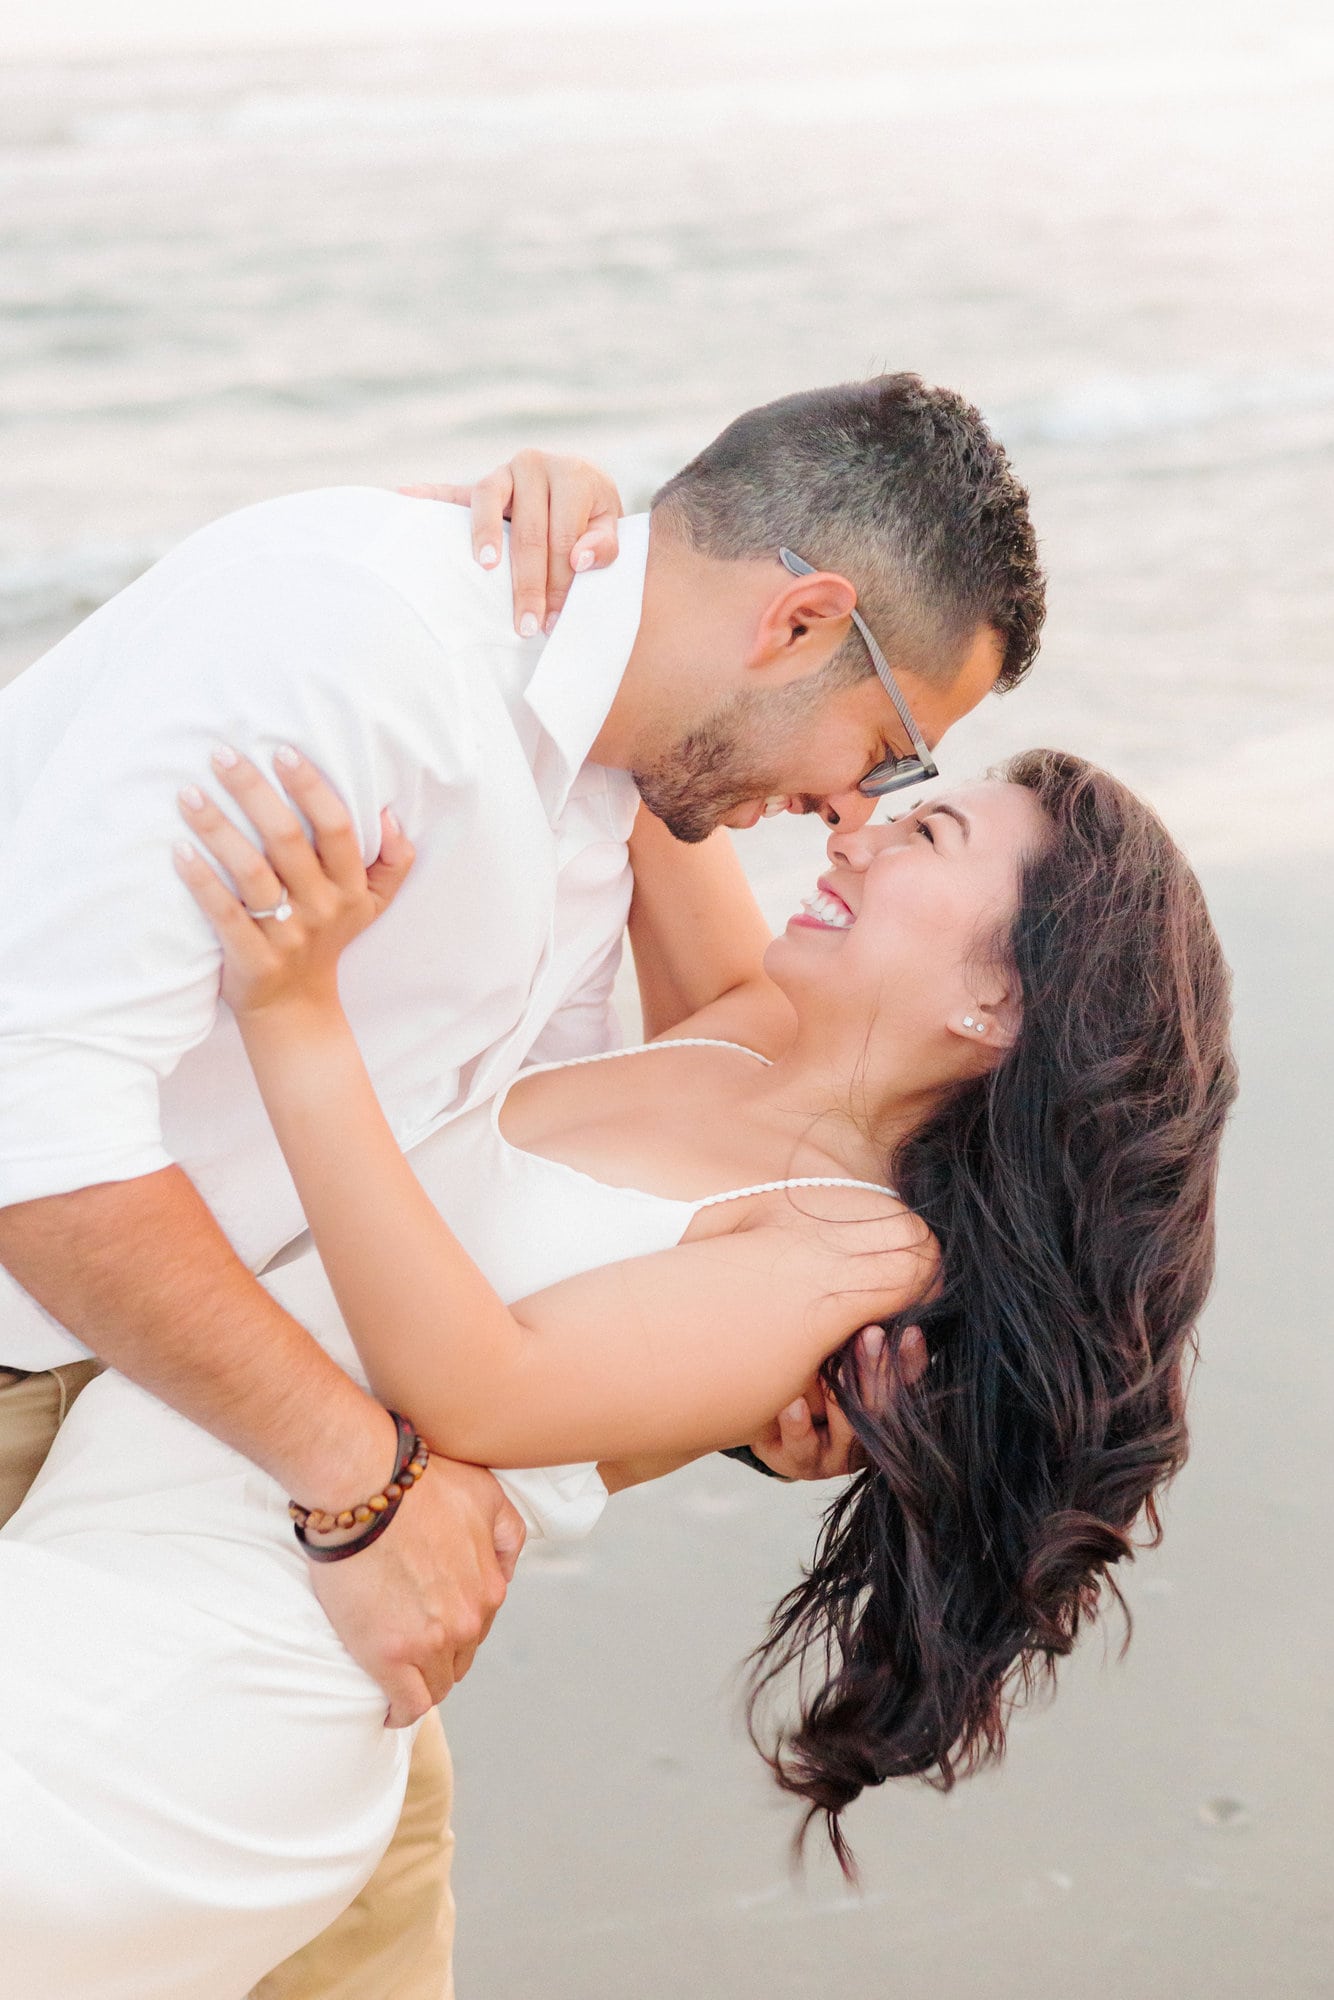 Edgar dips Carisil on the shoreline while taking engagement pictures on the beach.